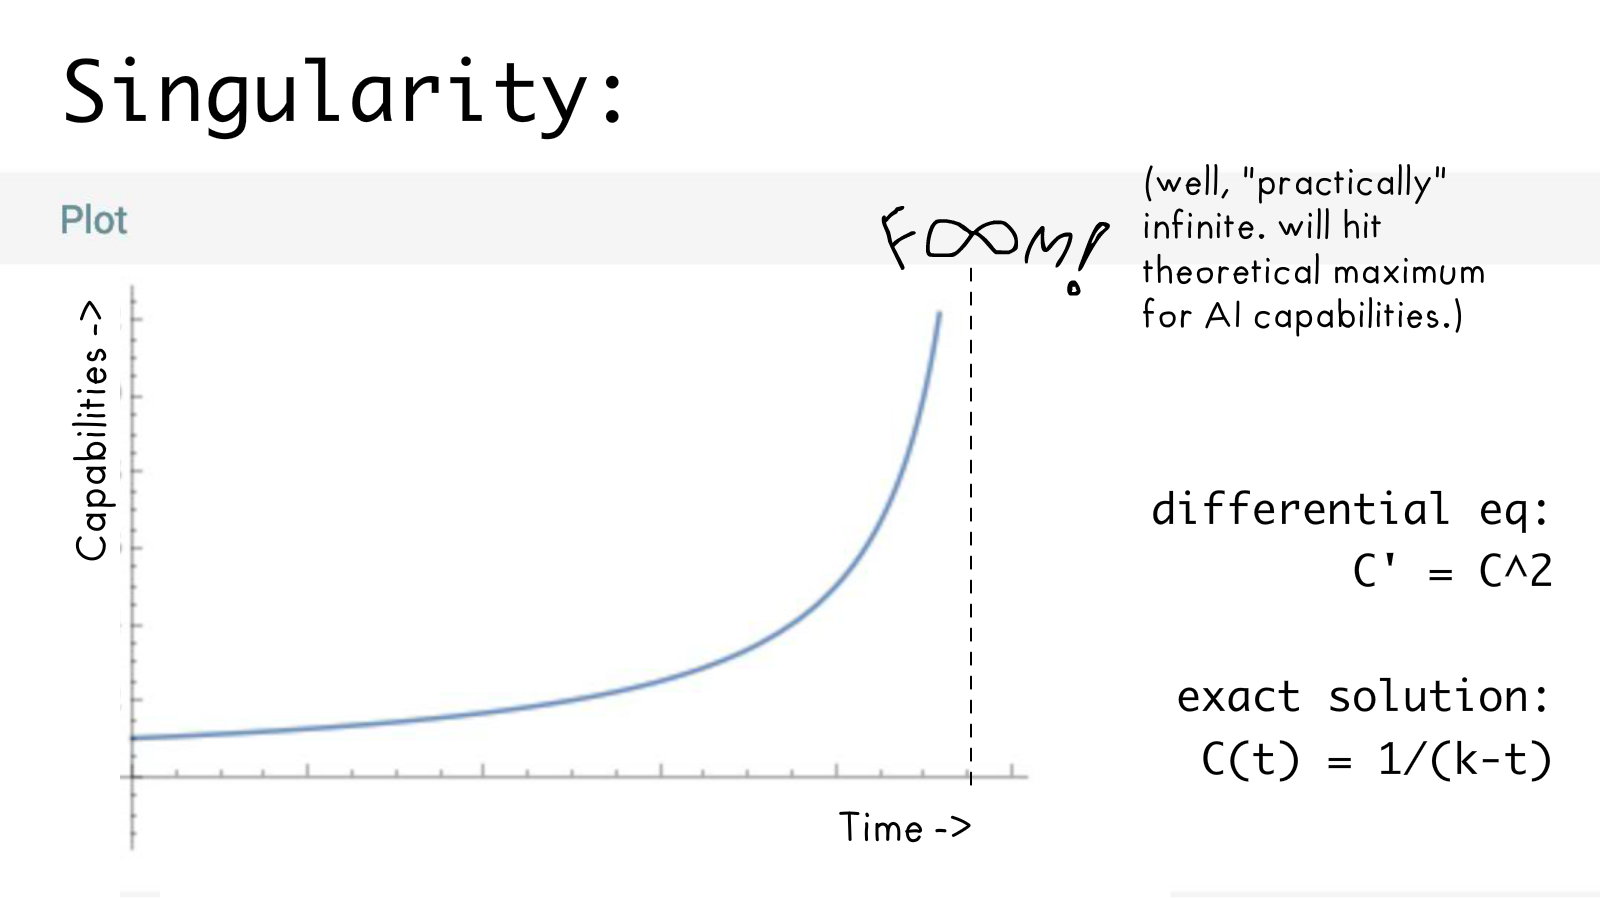 Graph of AI Capabilities over Time, going to infinity in finite time.